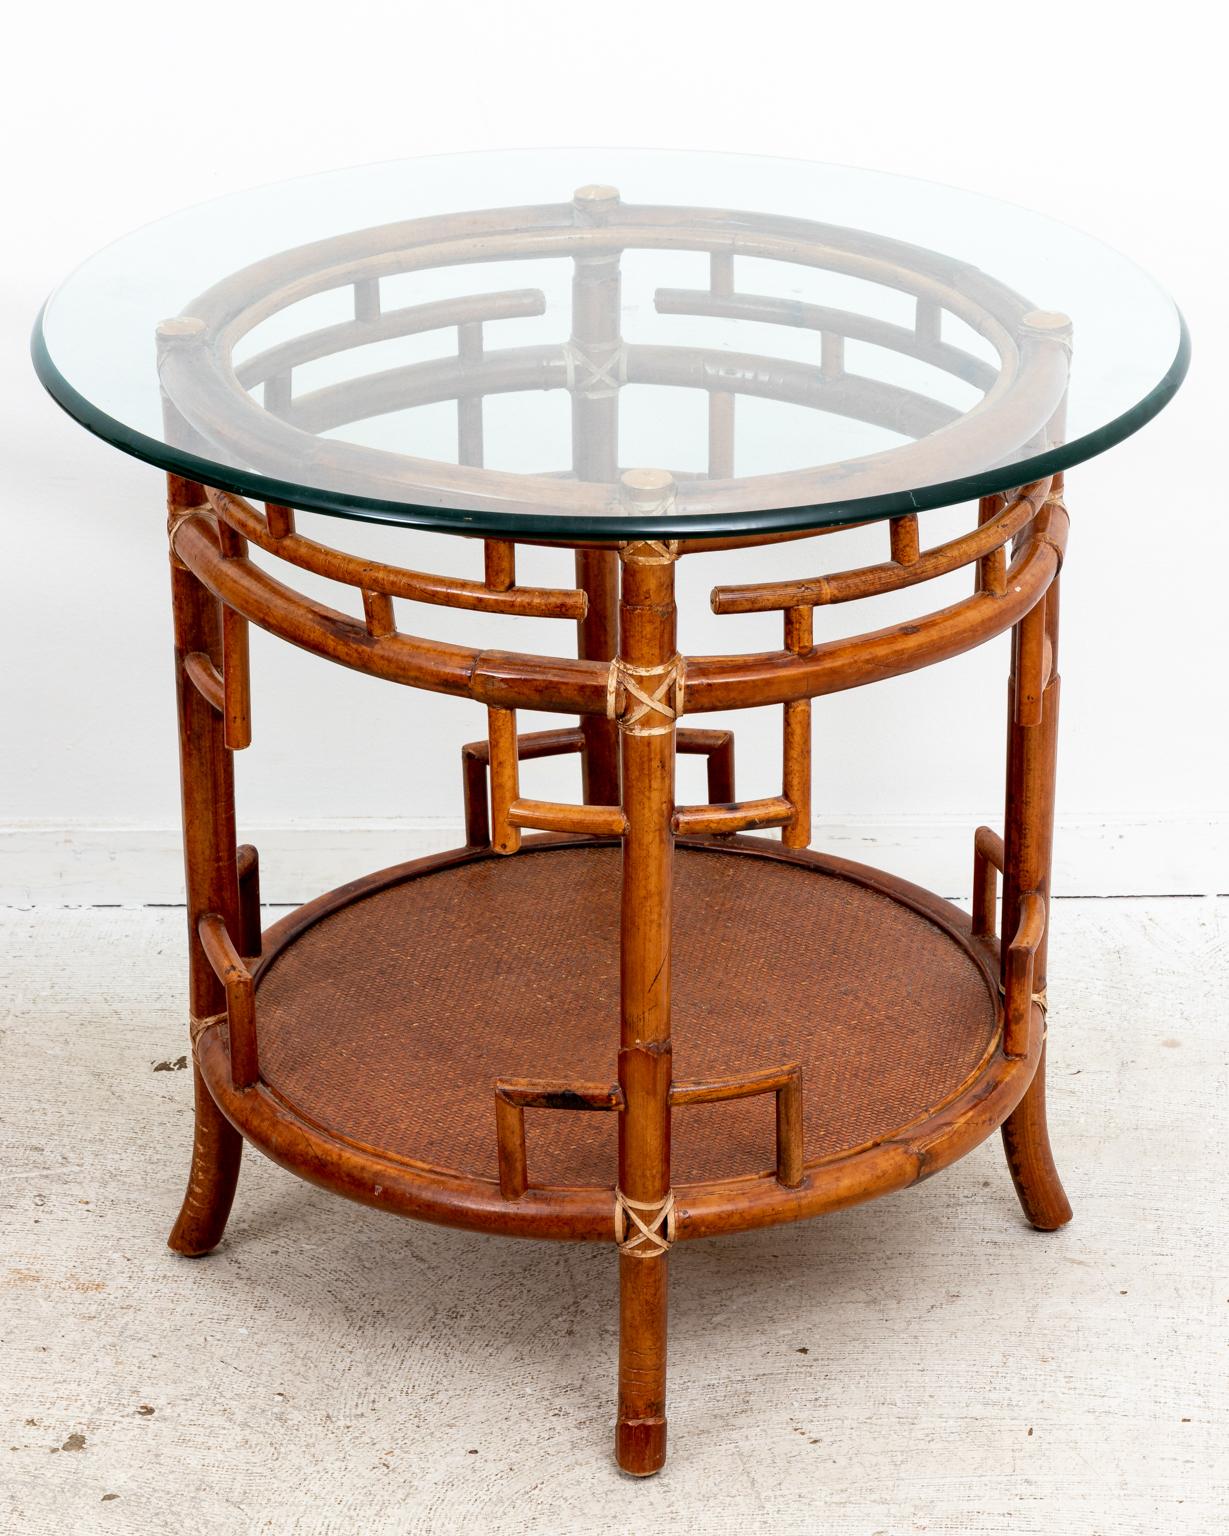 Circa 1970s pair of rattan Chippendale style round tables with glass tops, bottom shelf, and fretwork sides. Please note of wear consistent with age.